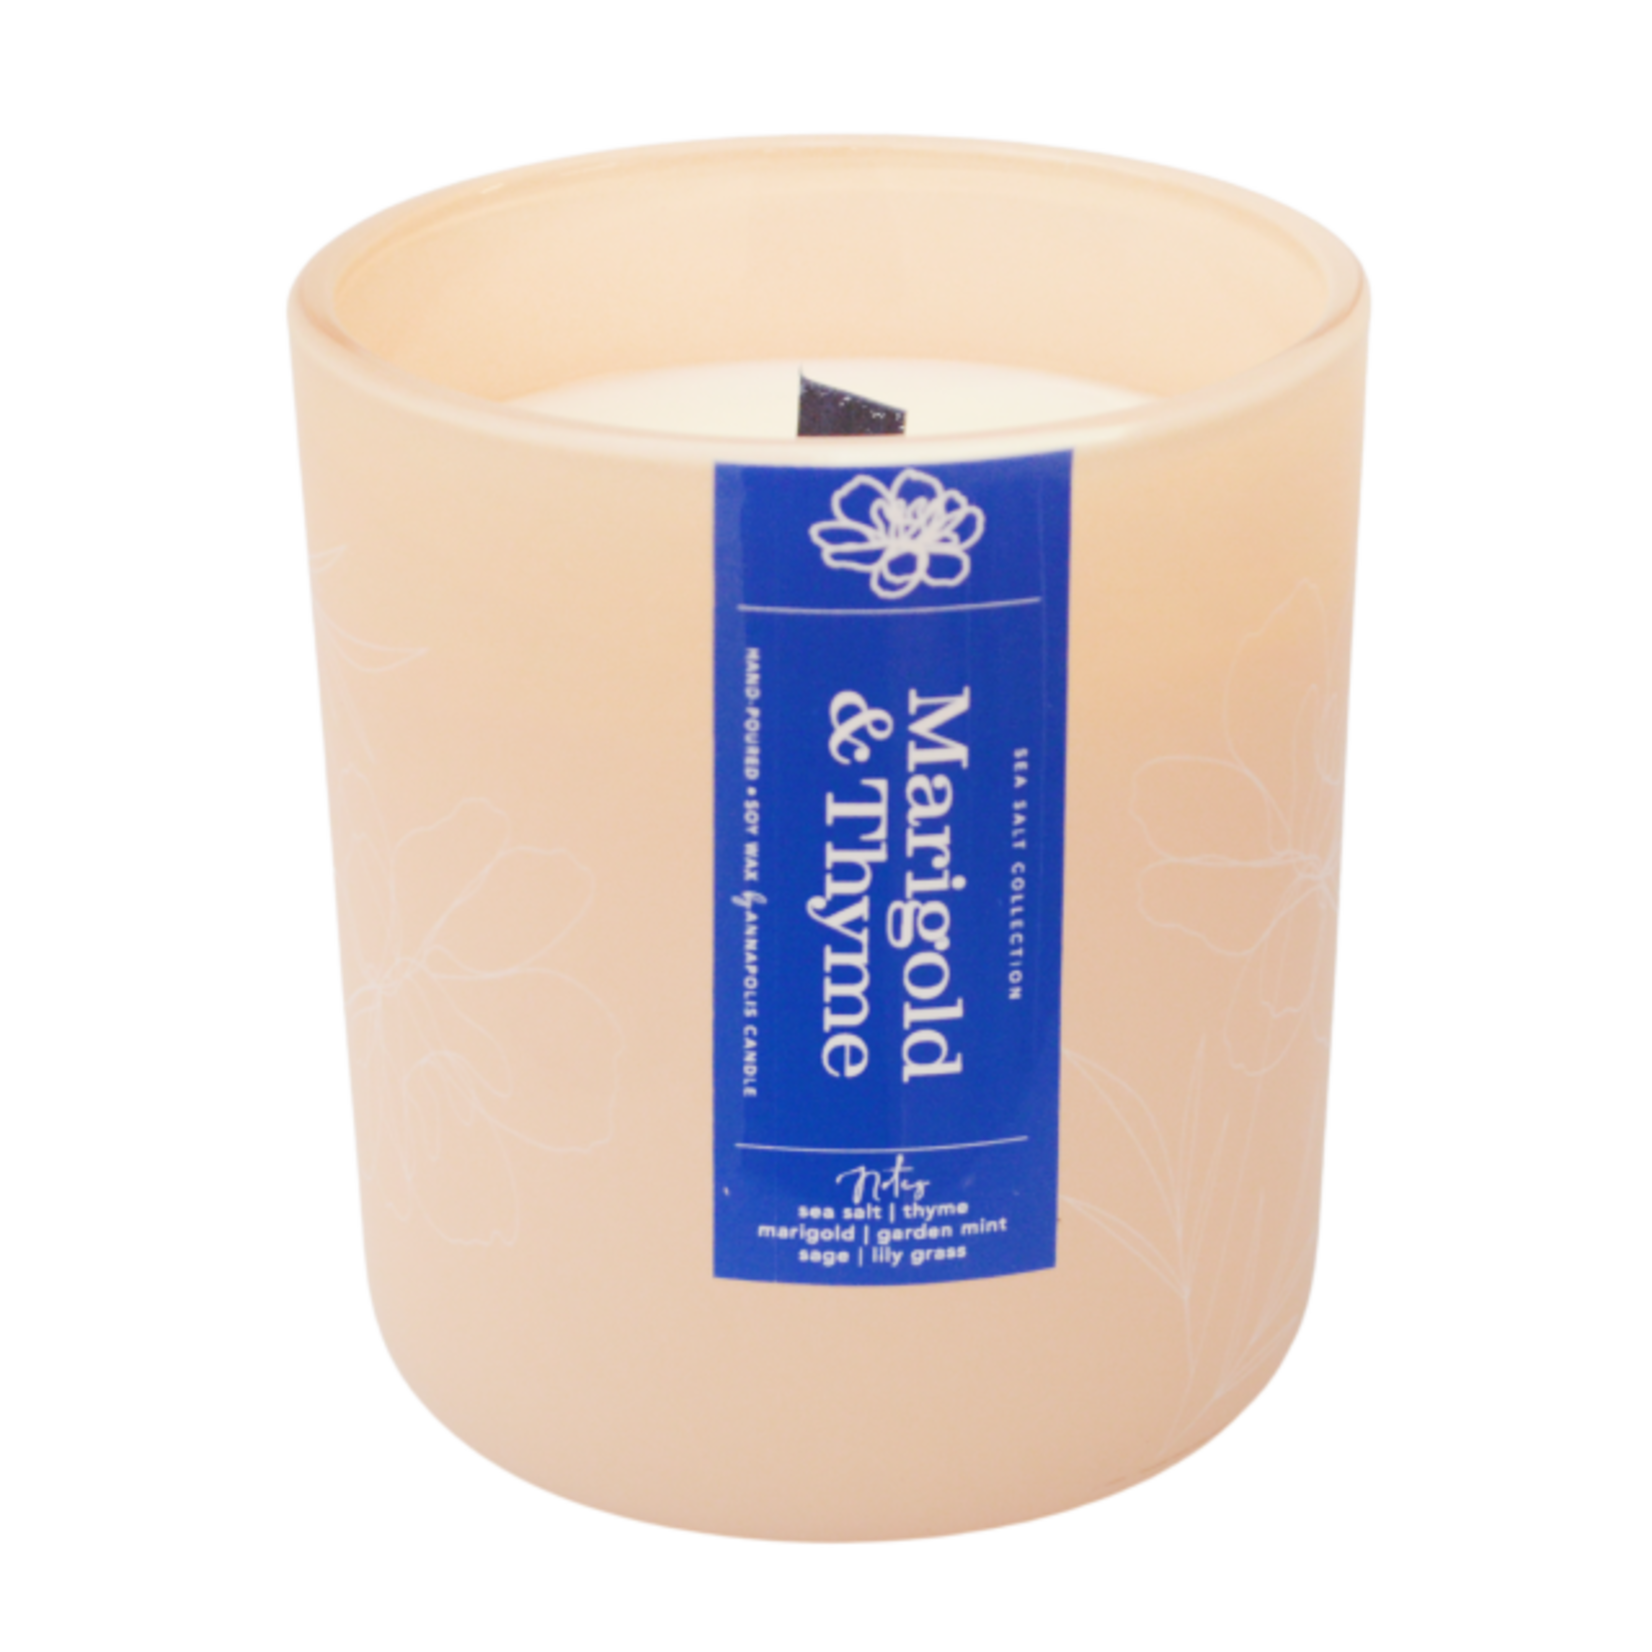 Annapolis Candle - Signature Wooden Wick - Marigold & Thyme